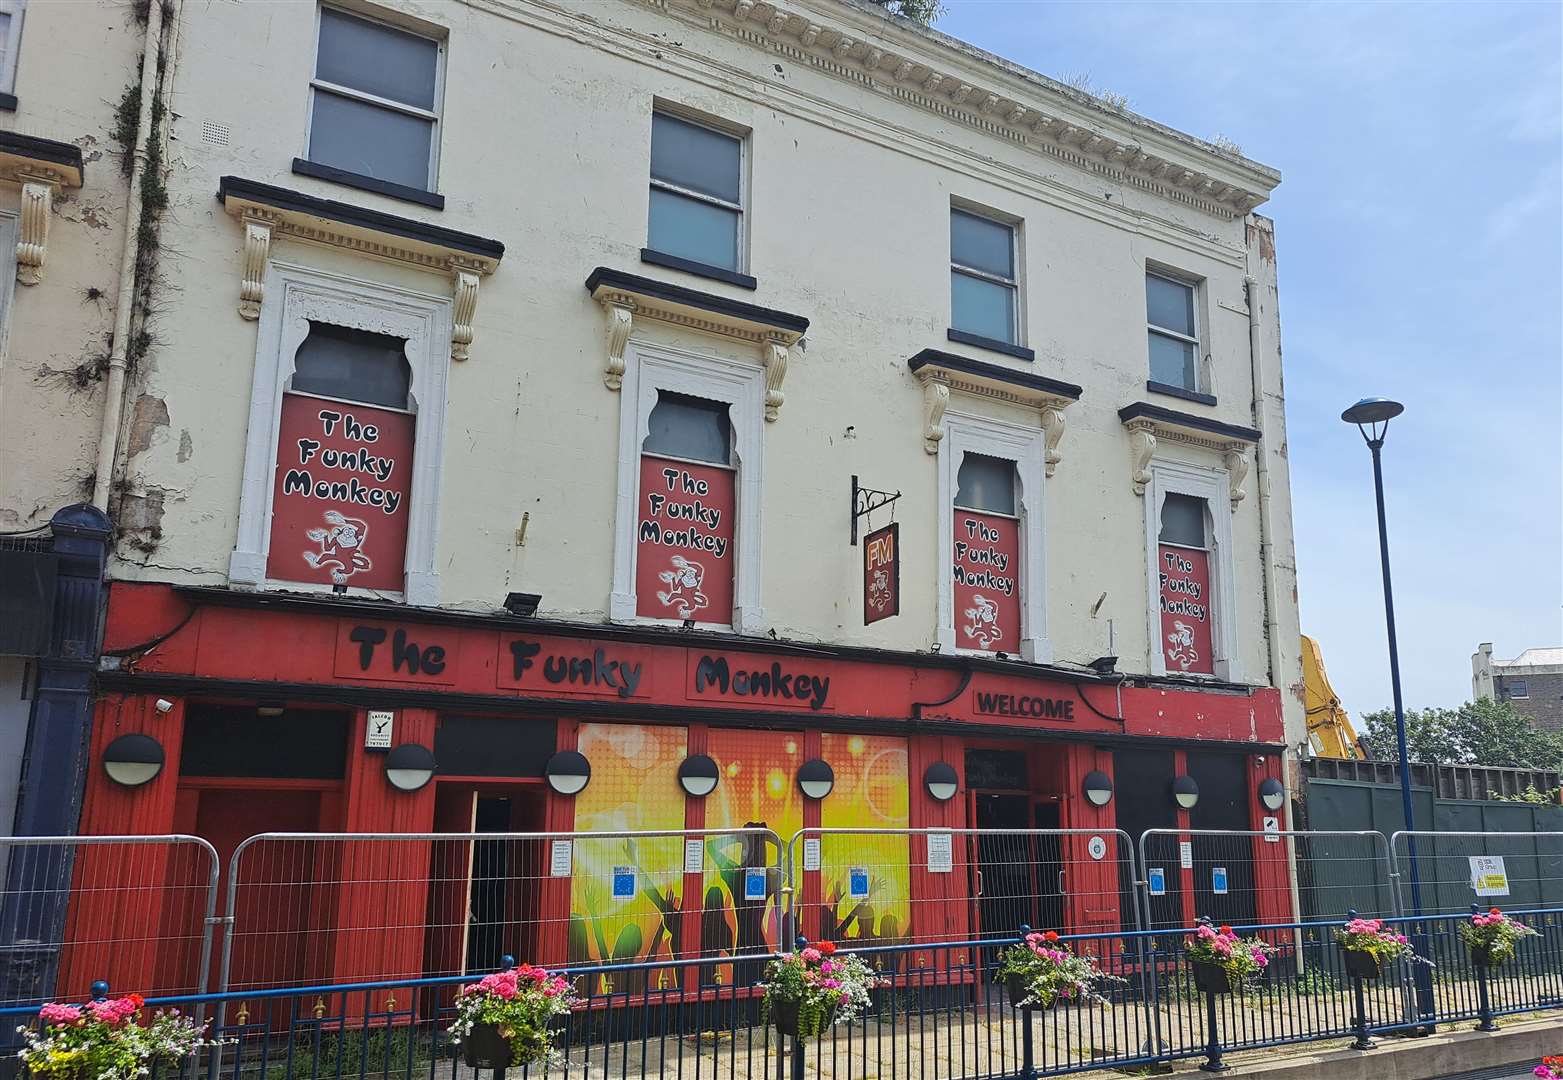 The Funky Monkey shortly before its demolition in August